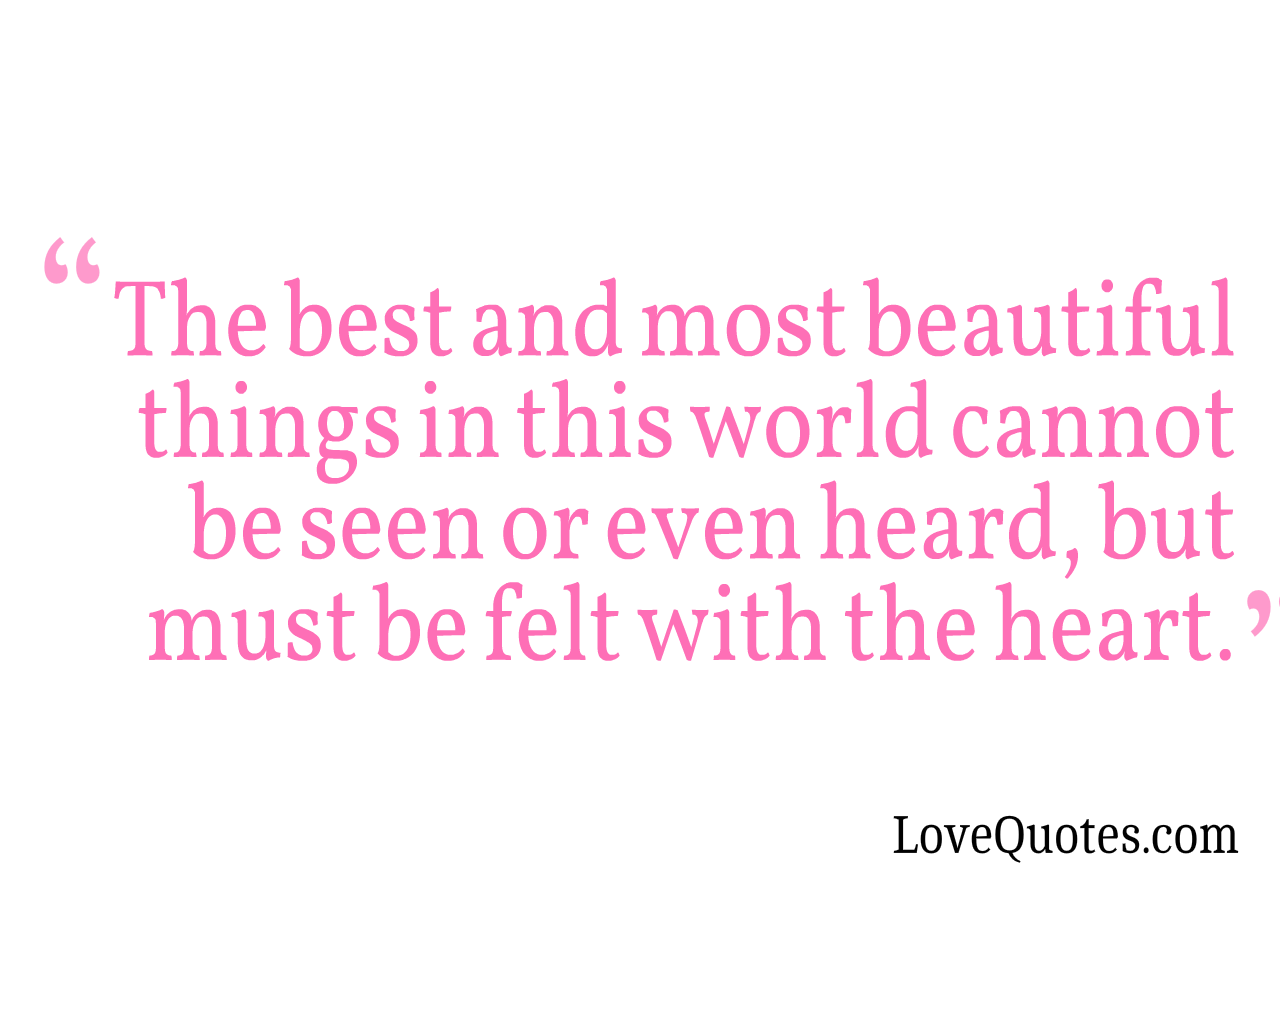 The Most Beautiful Things